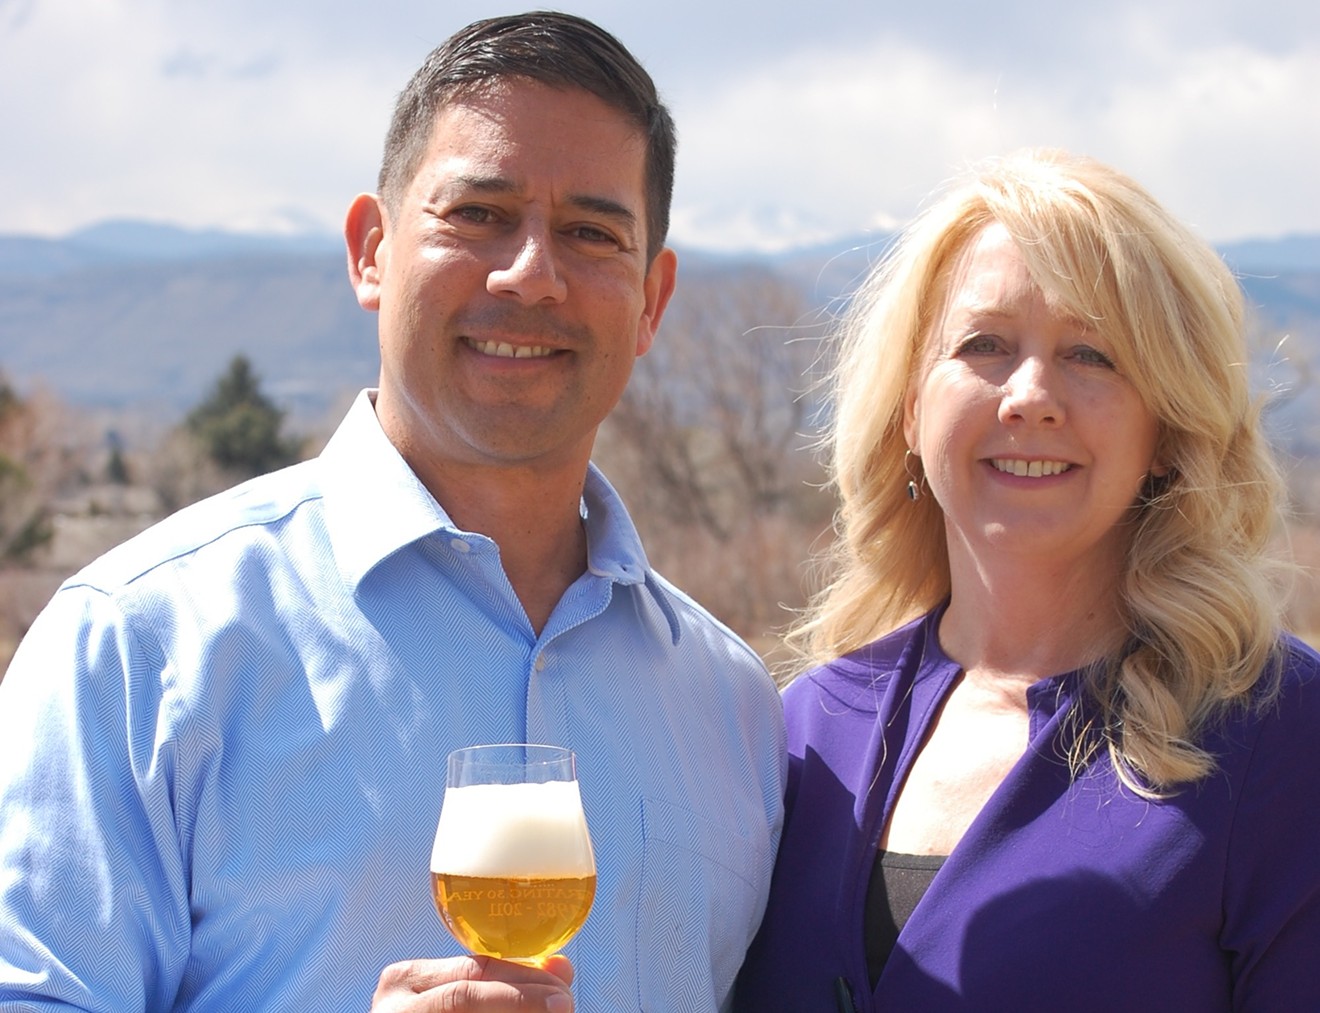 Keith and Jodi Villa launched Ceria Brewing, a marijuana-infused beer company, in 2018.